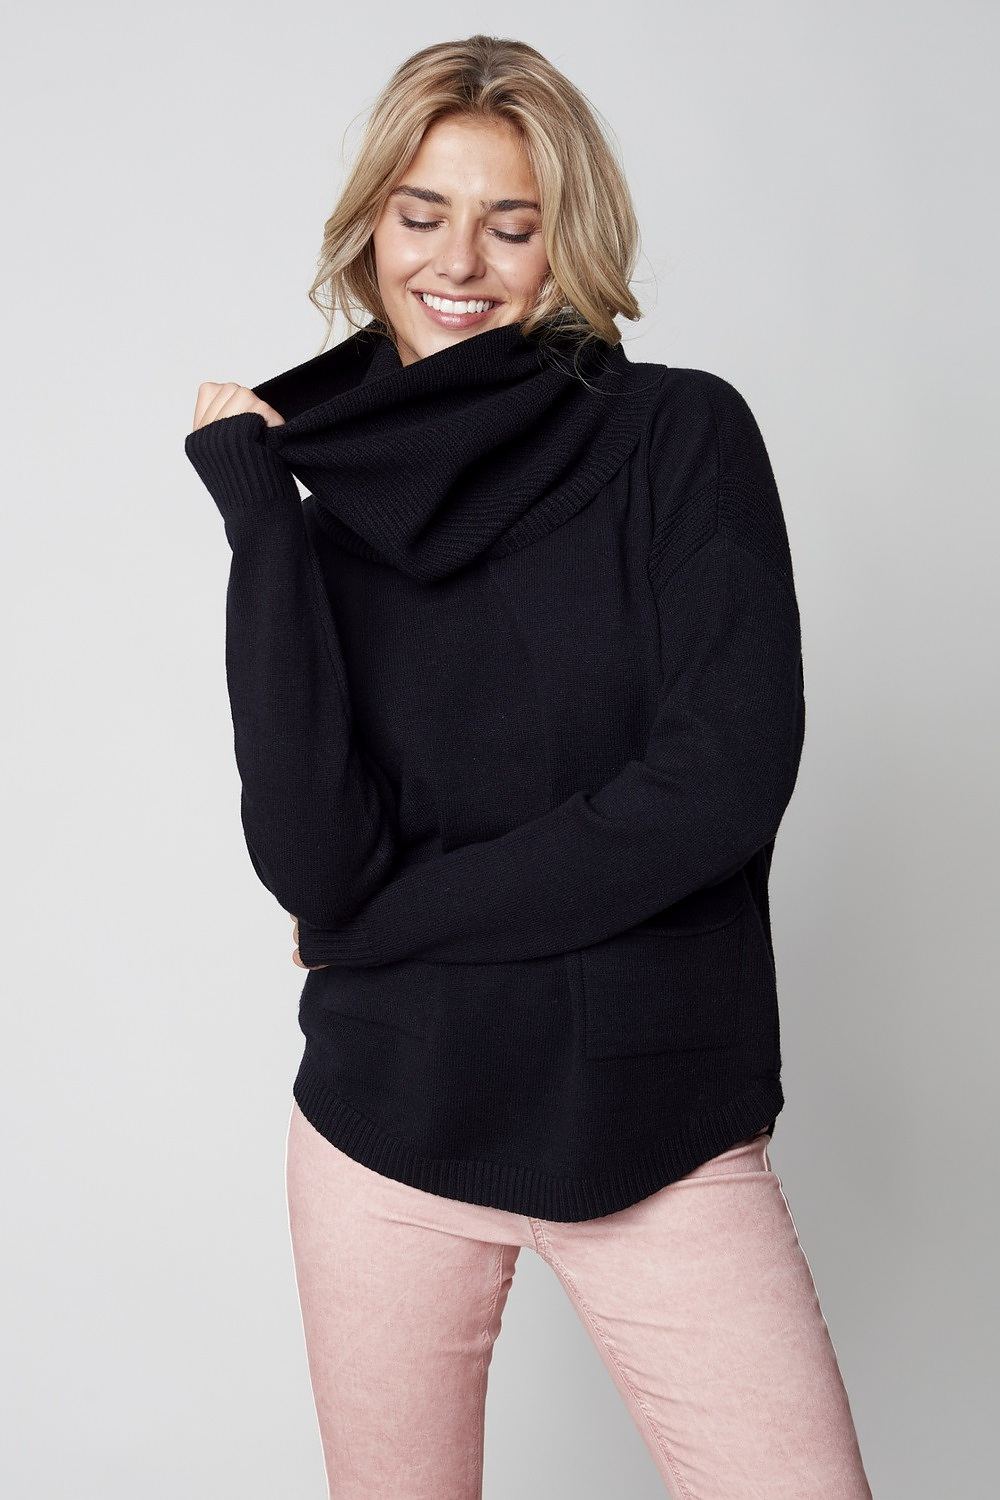 Sweater with Detachable Scarf Style C2420. Black